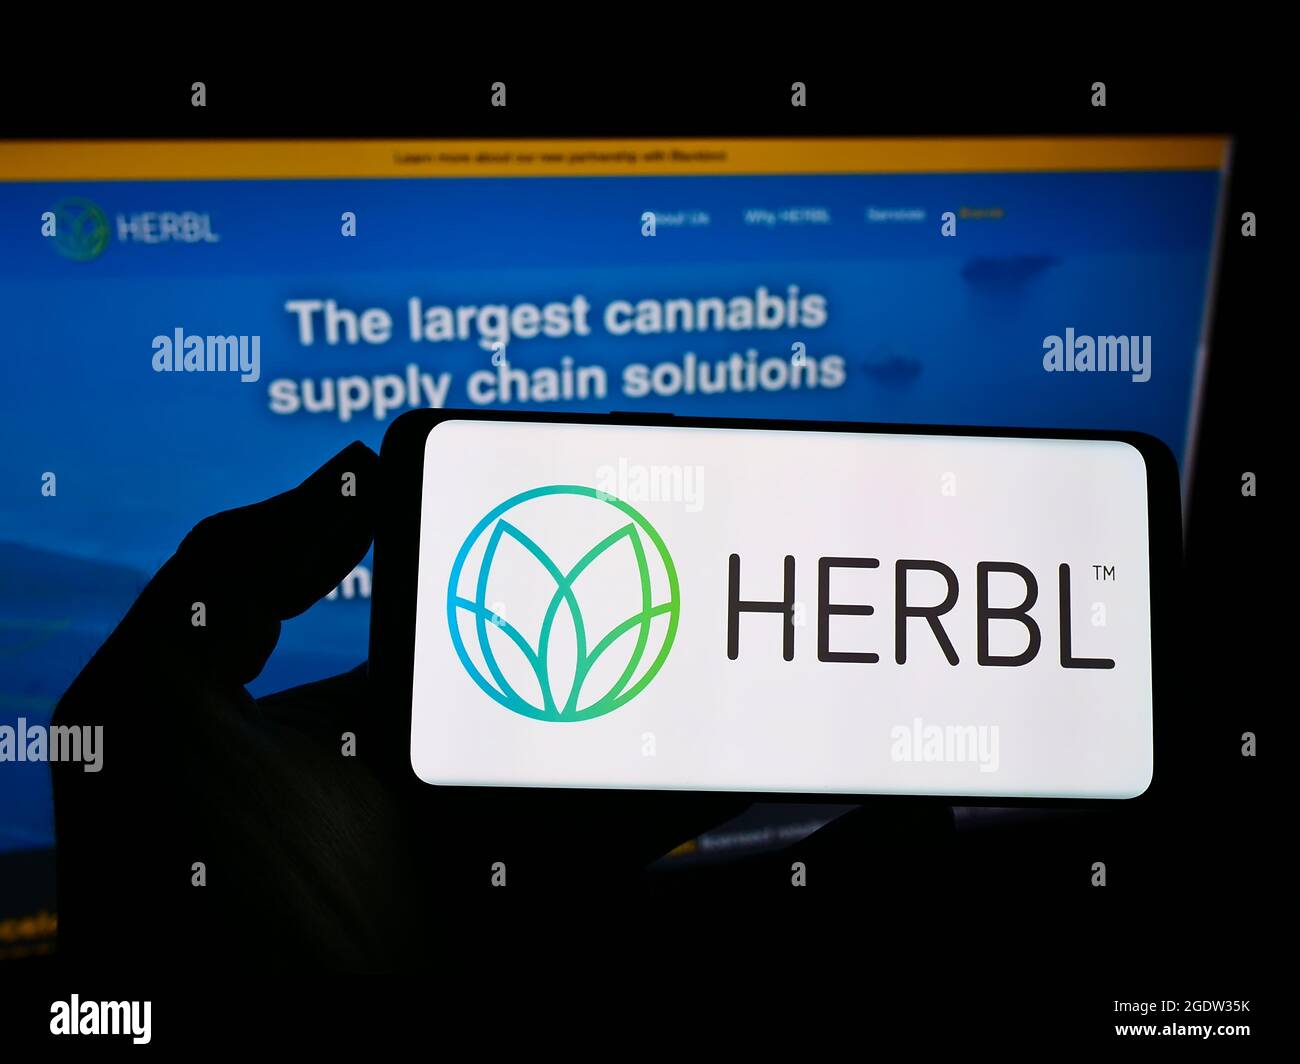 Person holding smartphone with logo of US cannabis supply chain company HERBL on screen in front of website. Focus on phone display. Stock Photo